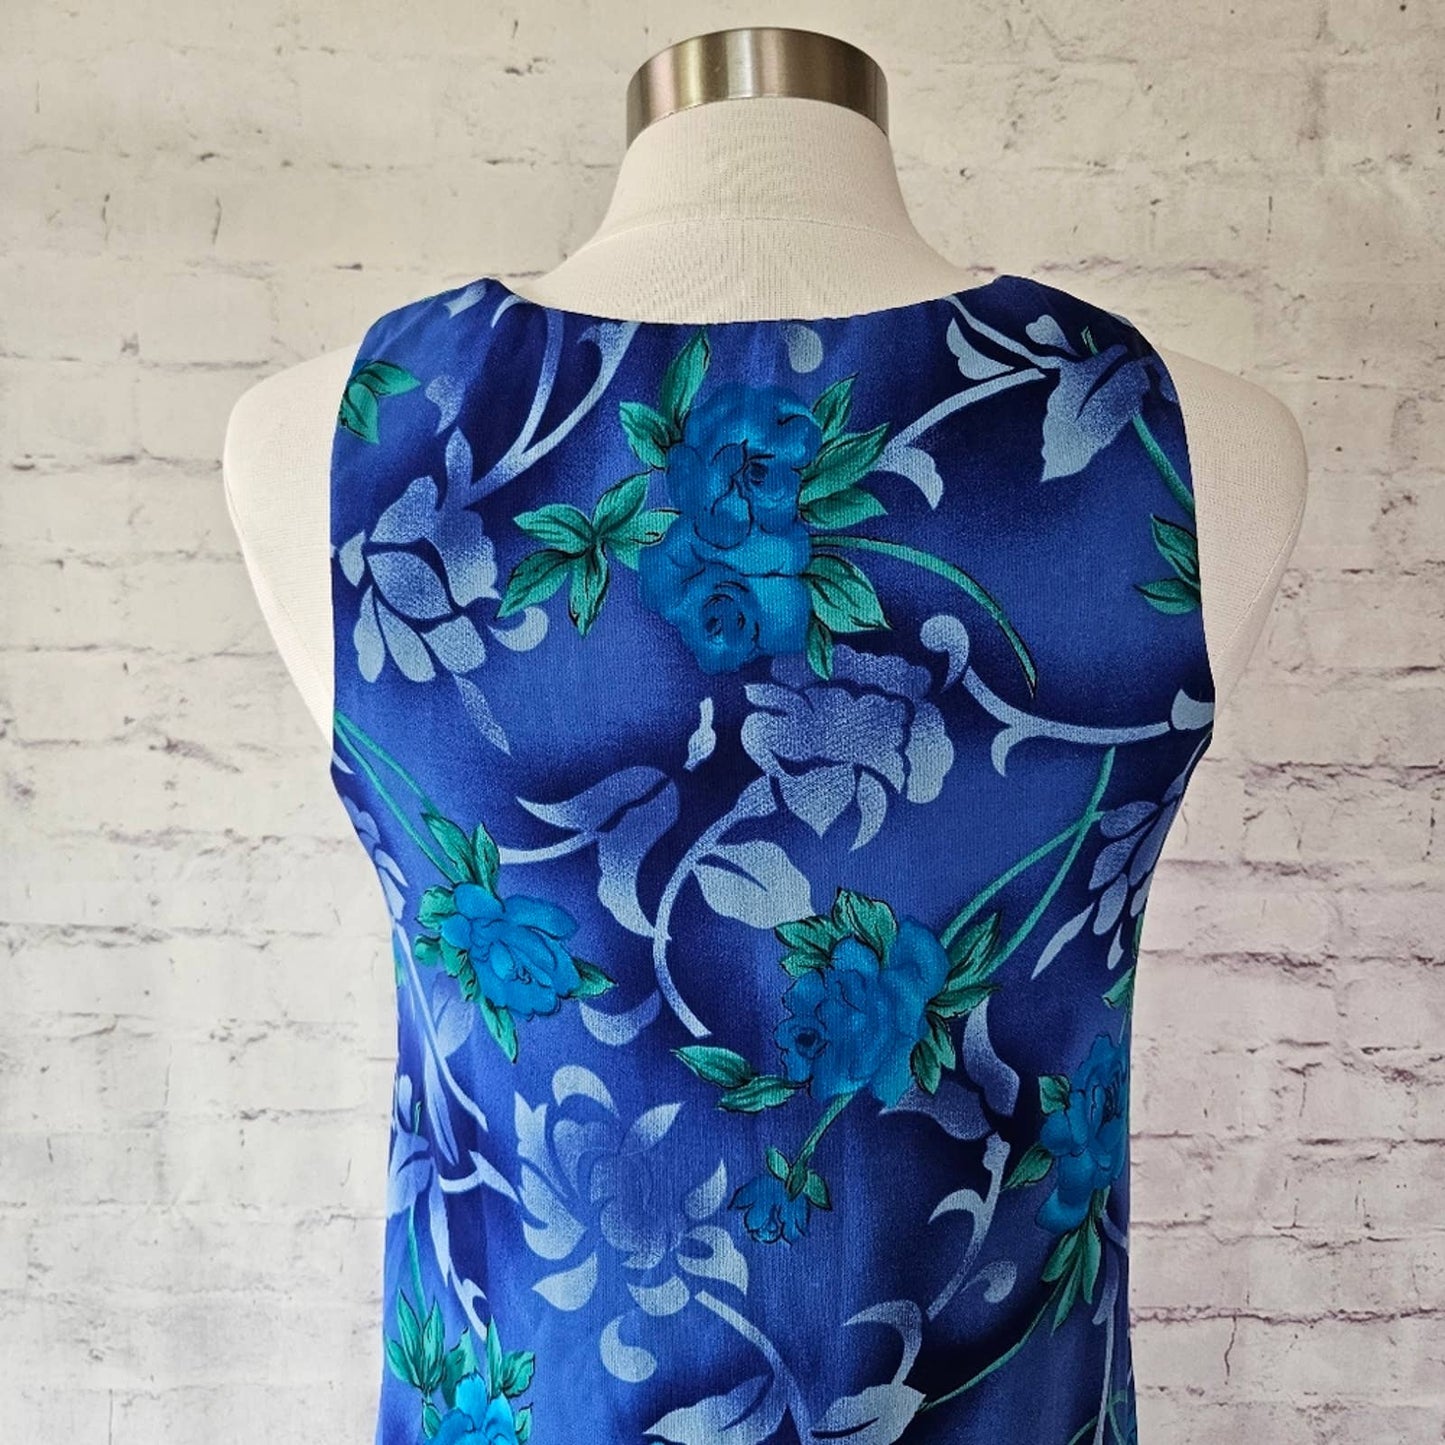 Vintage 90s All That Jazz Blue Teal Floral Sleeveless Shift Dress